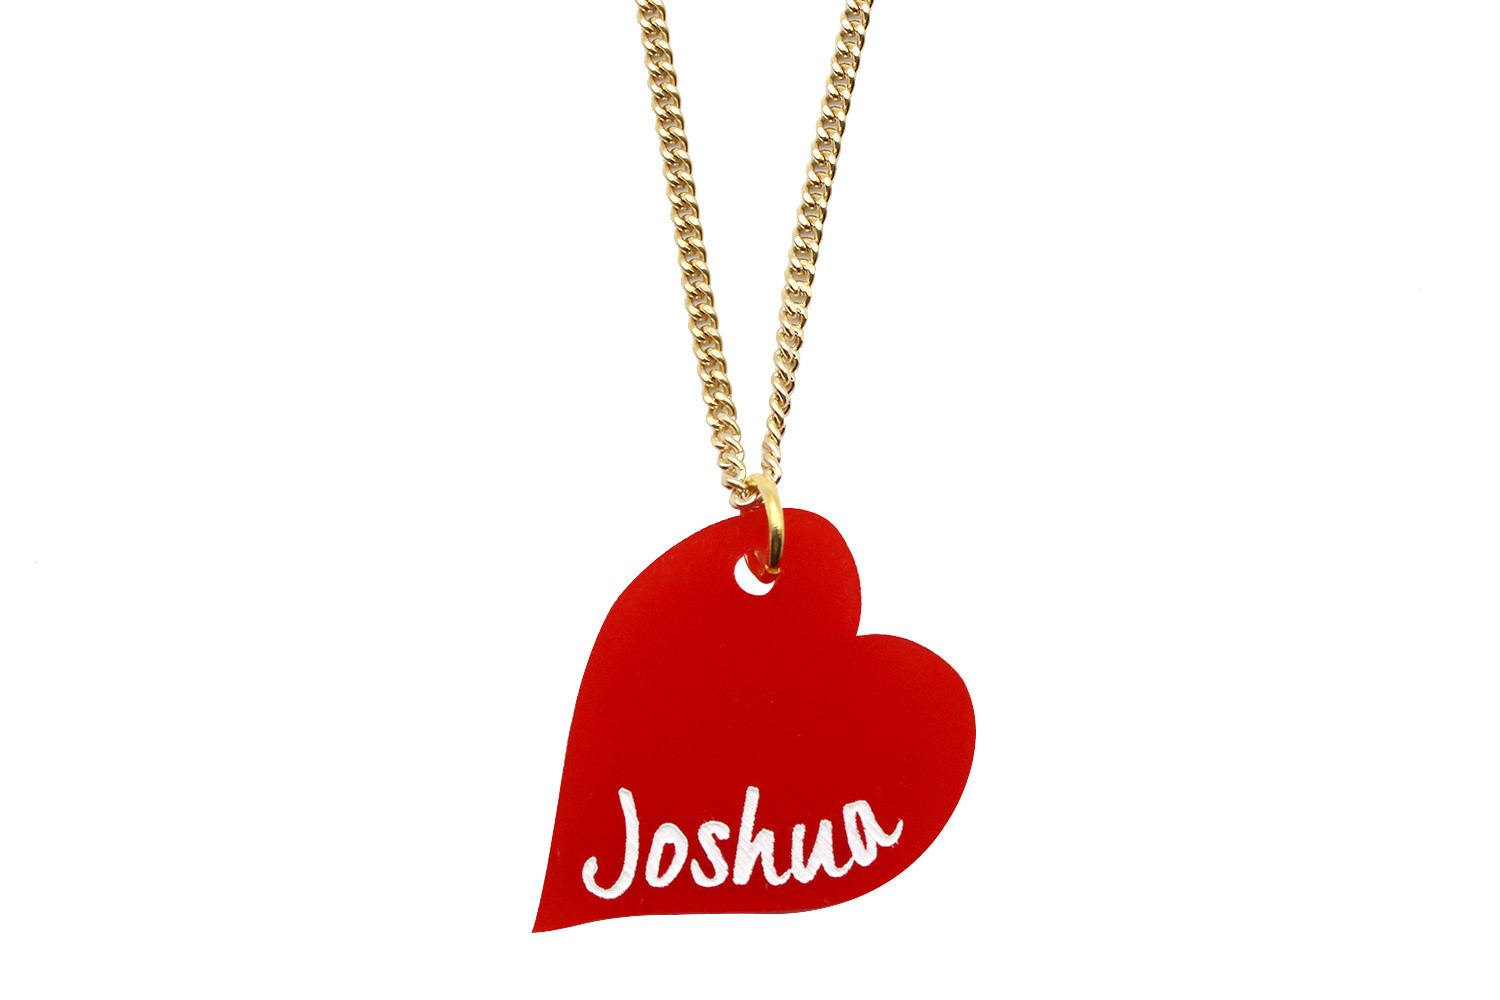 Heart Shaped Pendant with Name on Chain Necklace